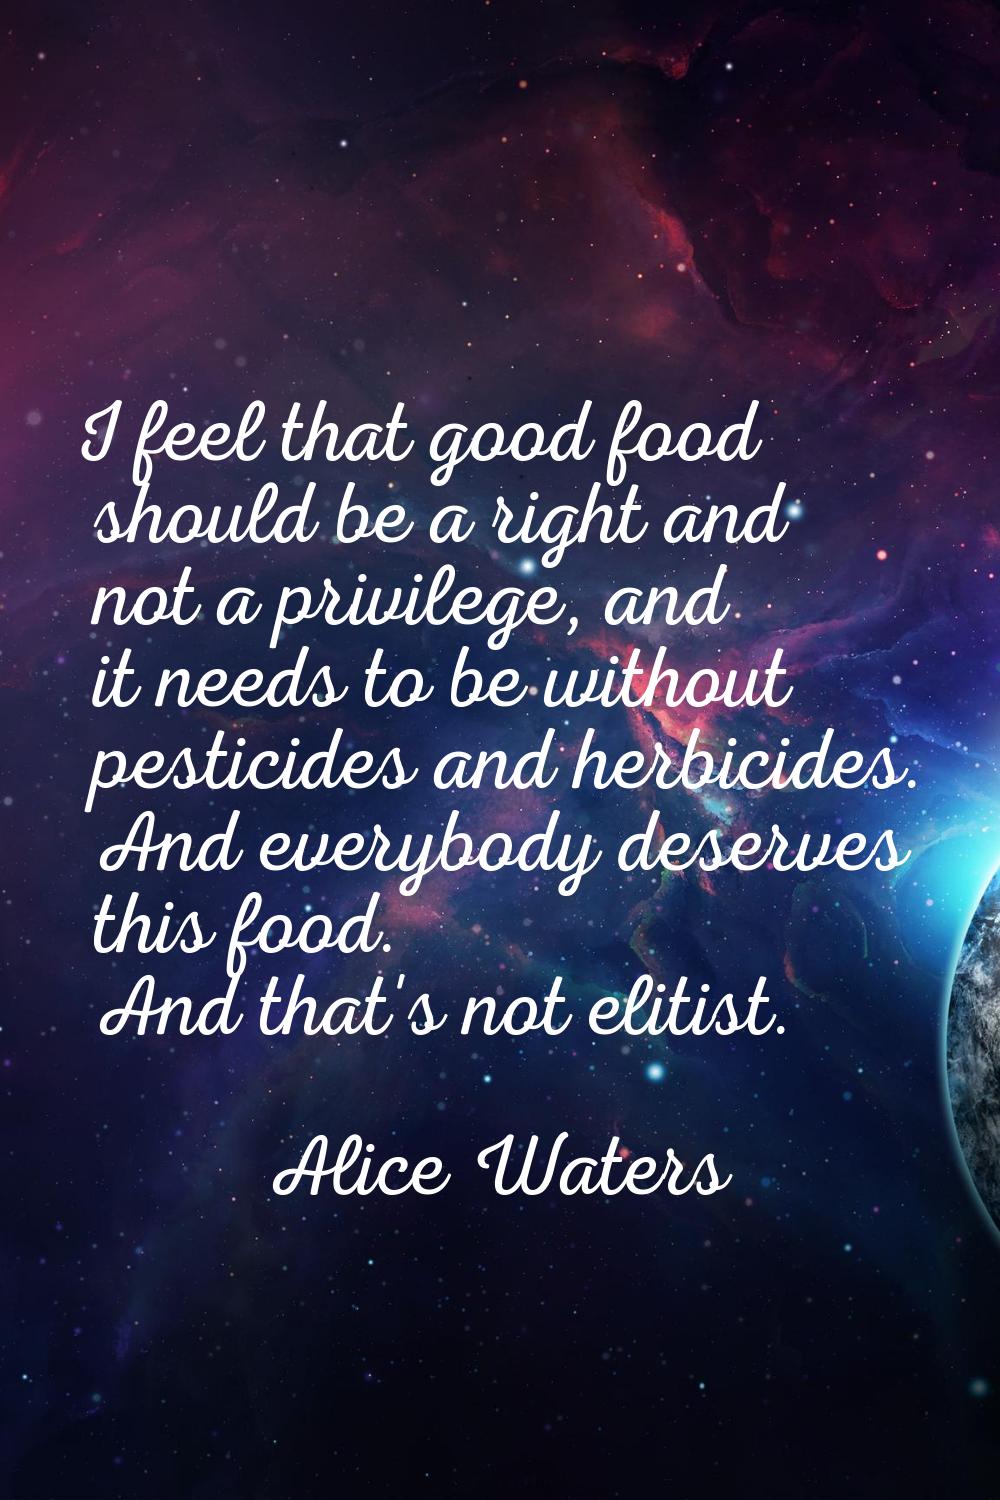 I feel that good food should be a right and not a privilege, and it needs to be without pesticides 